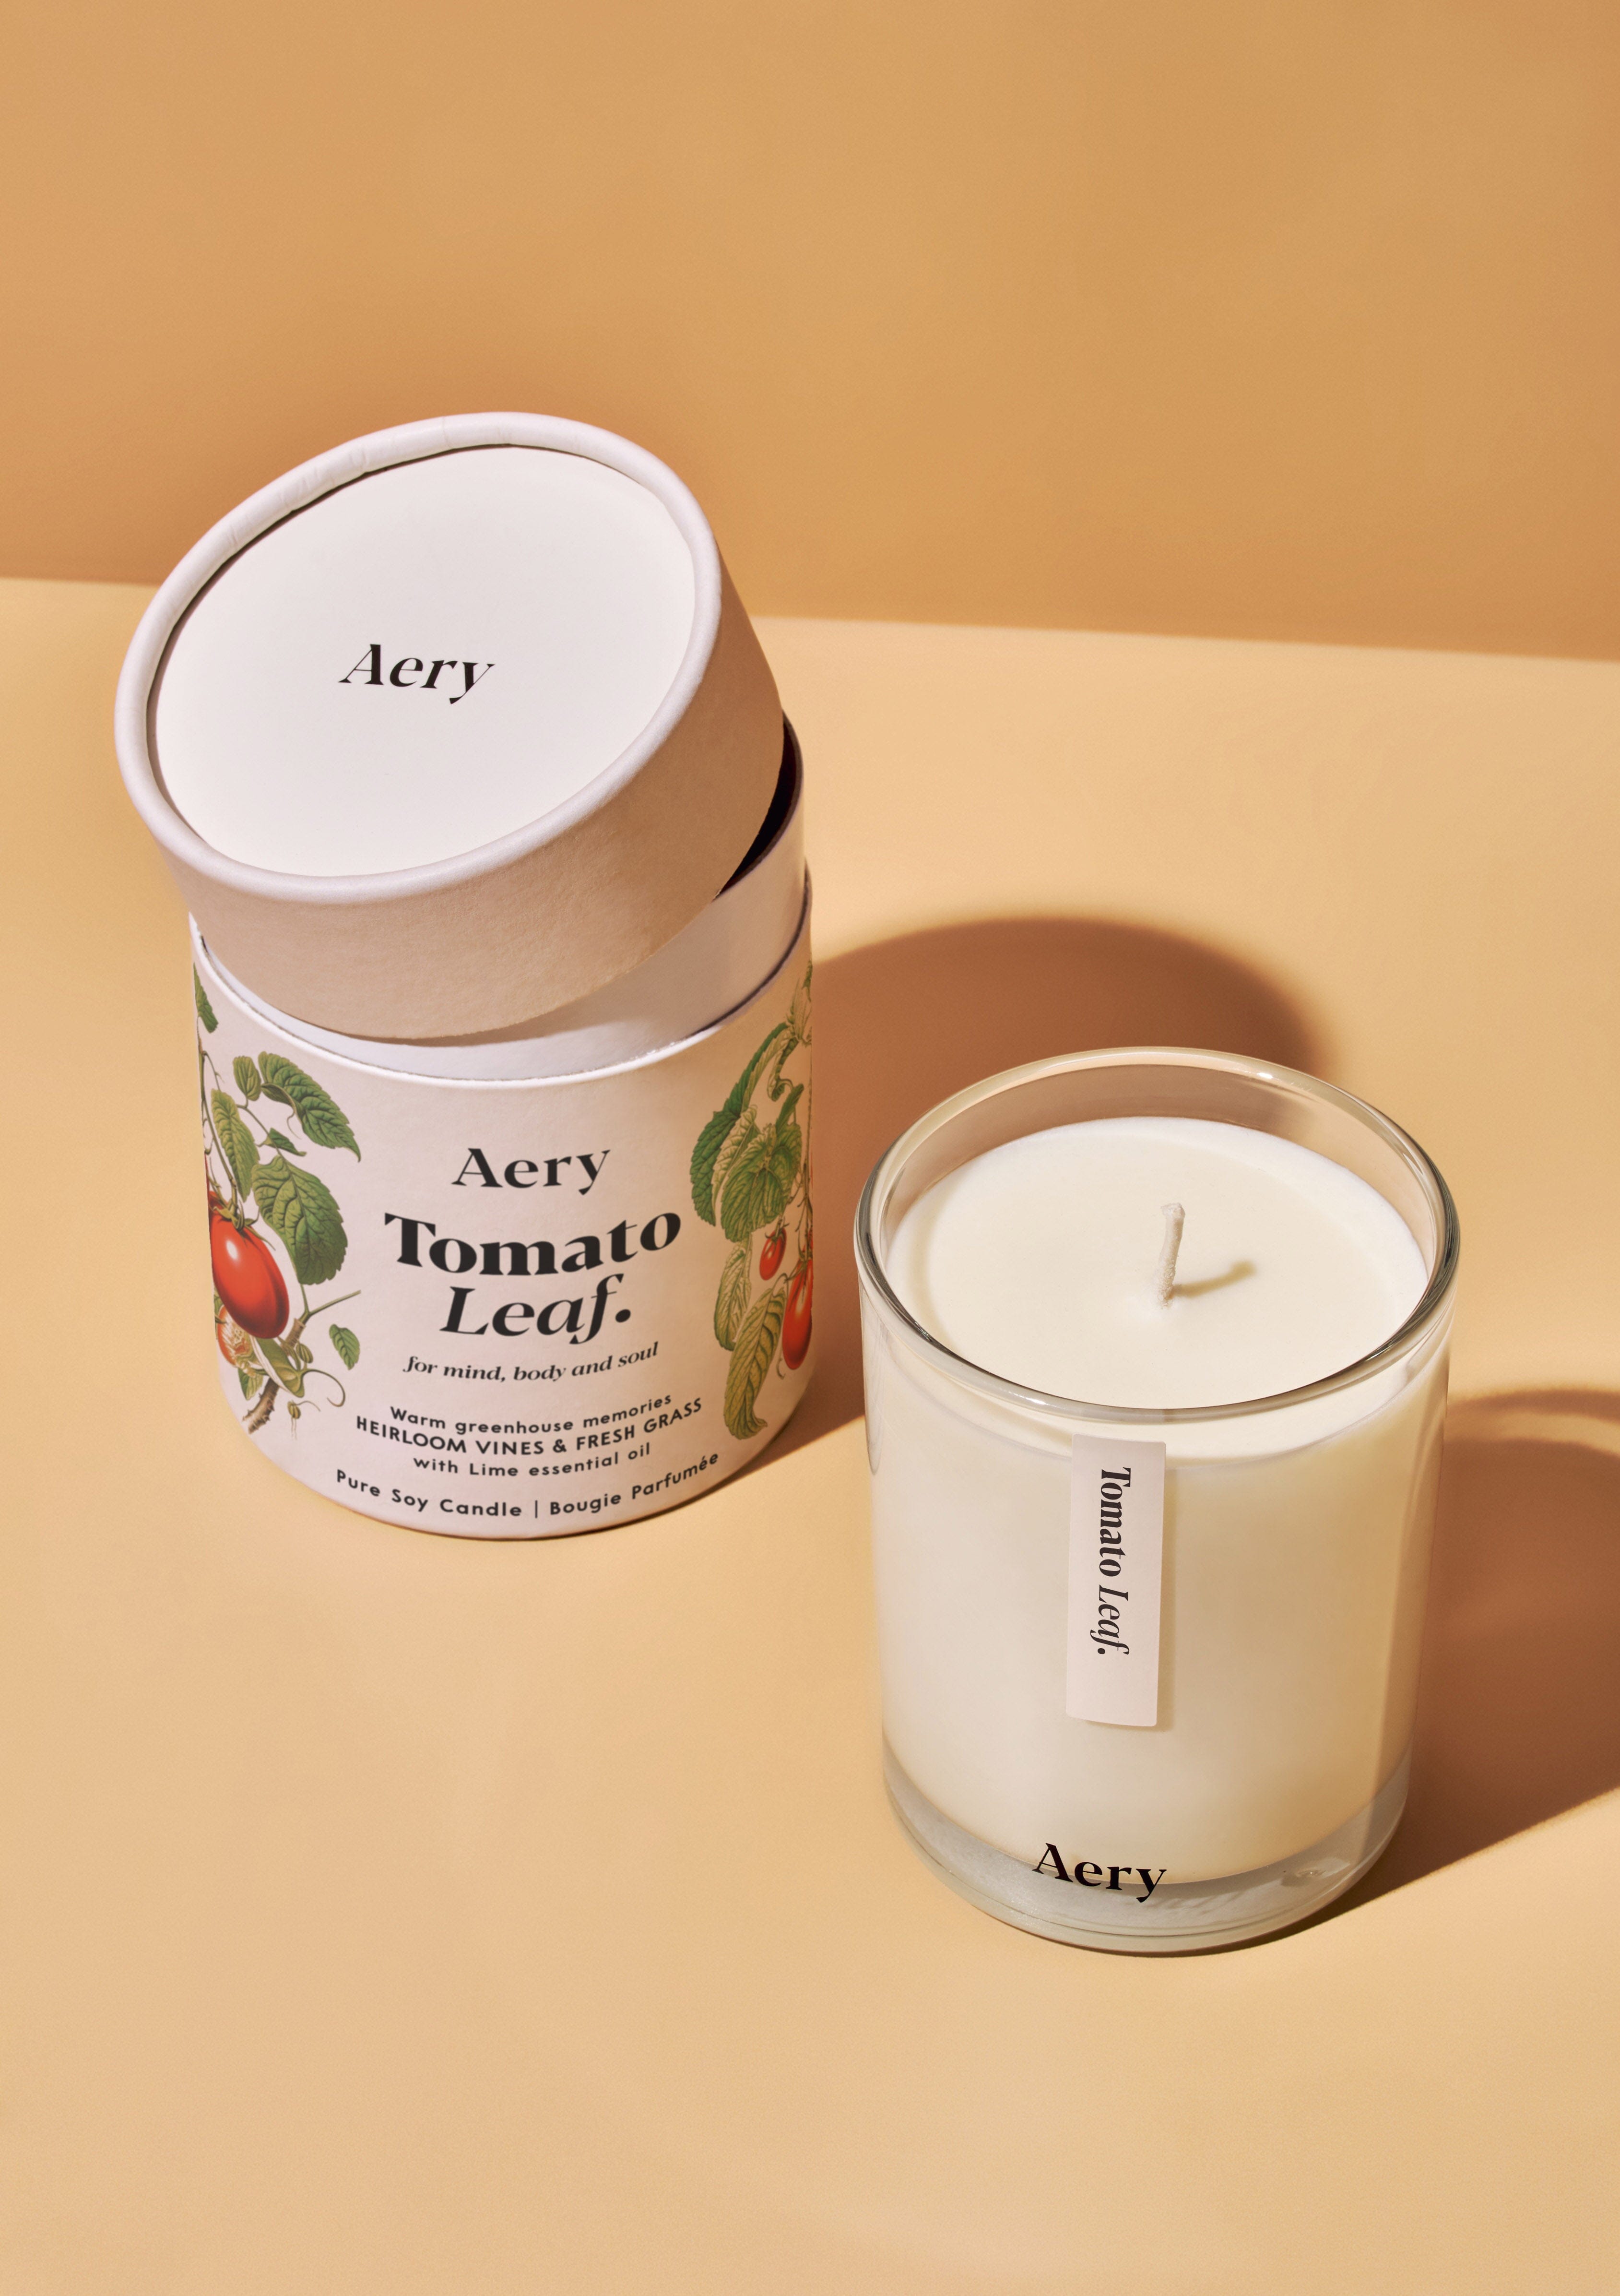 tomato leaf scented candle displayed next to decorative illustrated packaging